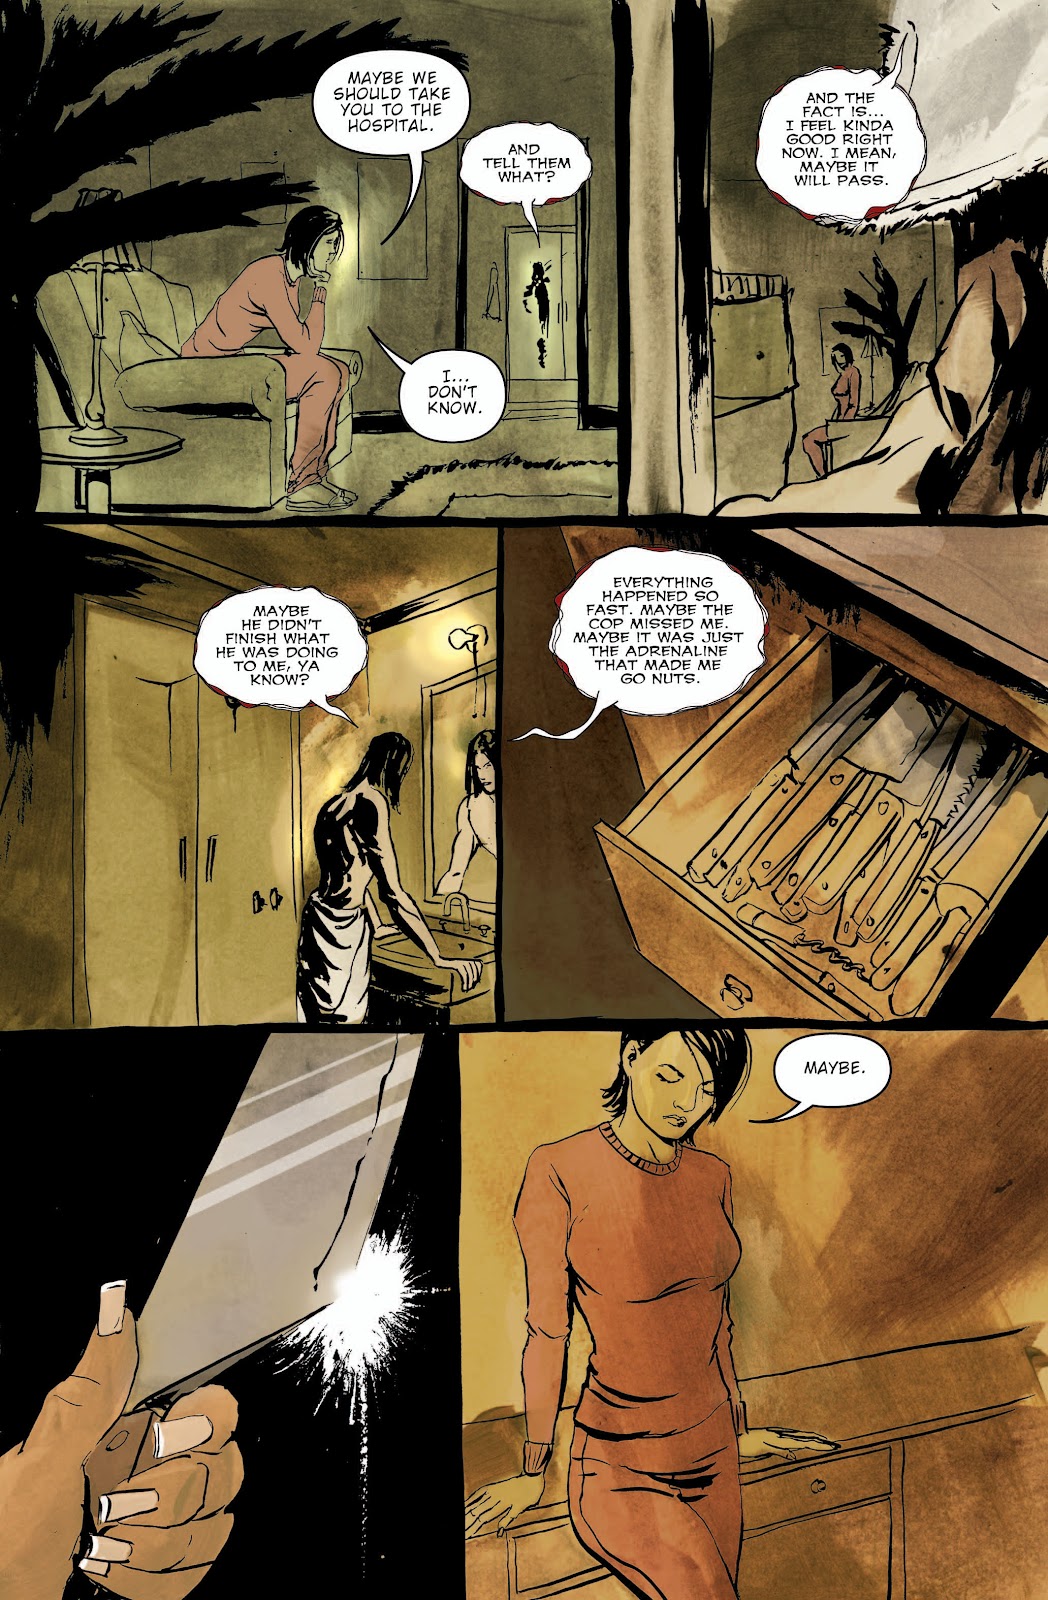 30 Days of Night: Bloodsucker Tales issue 3 - Page 4